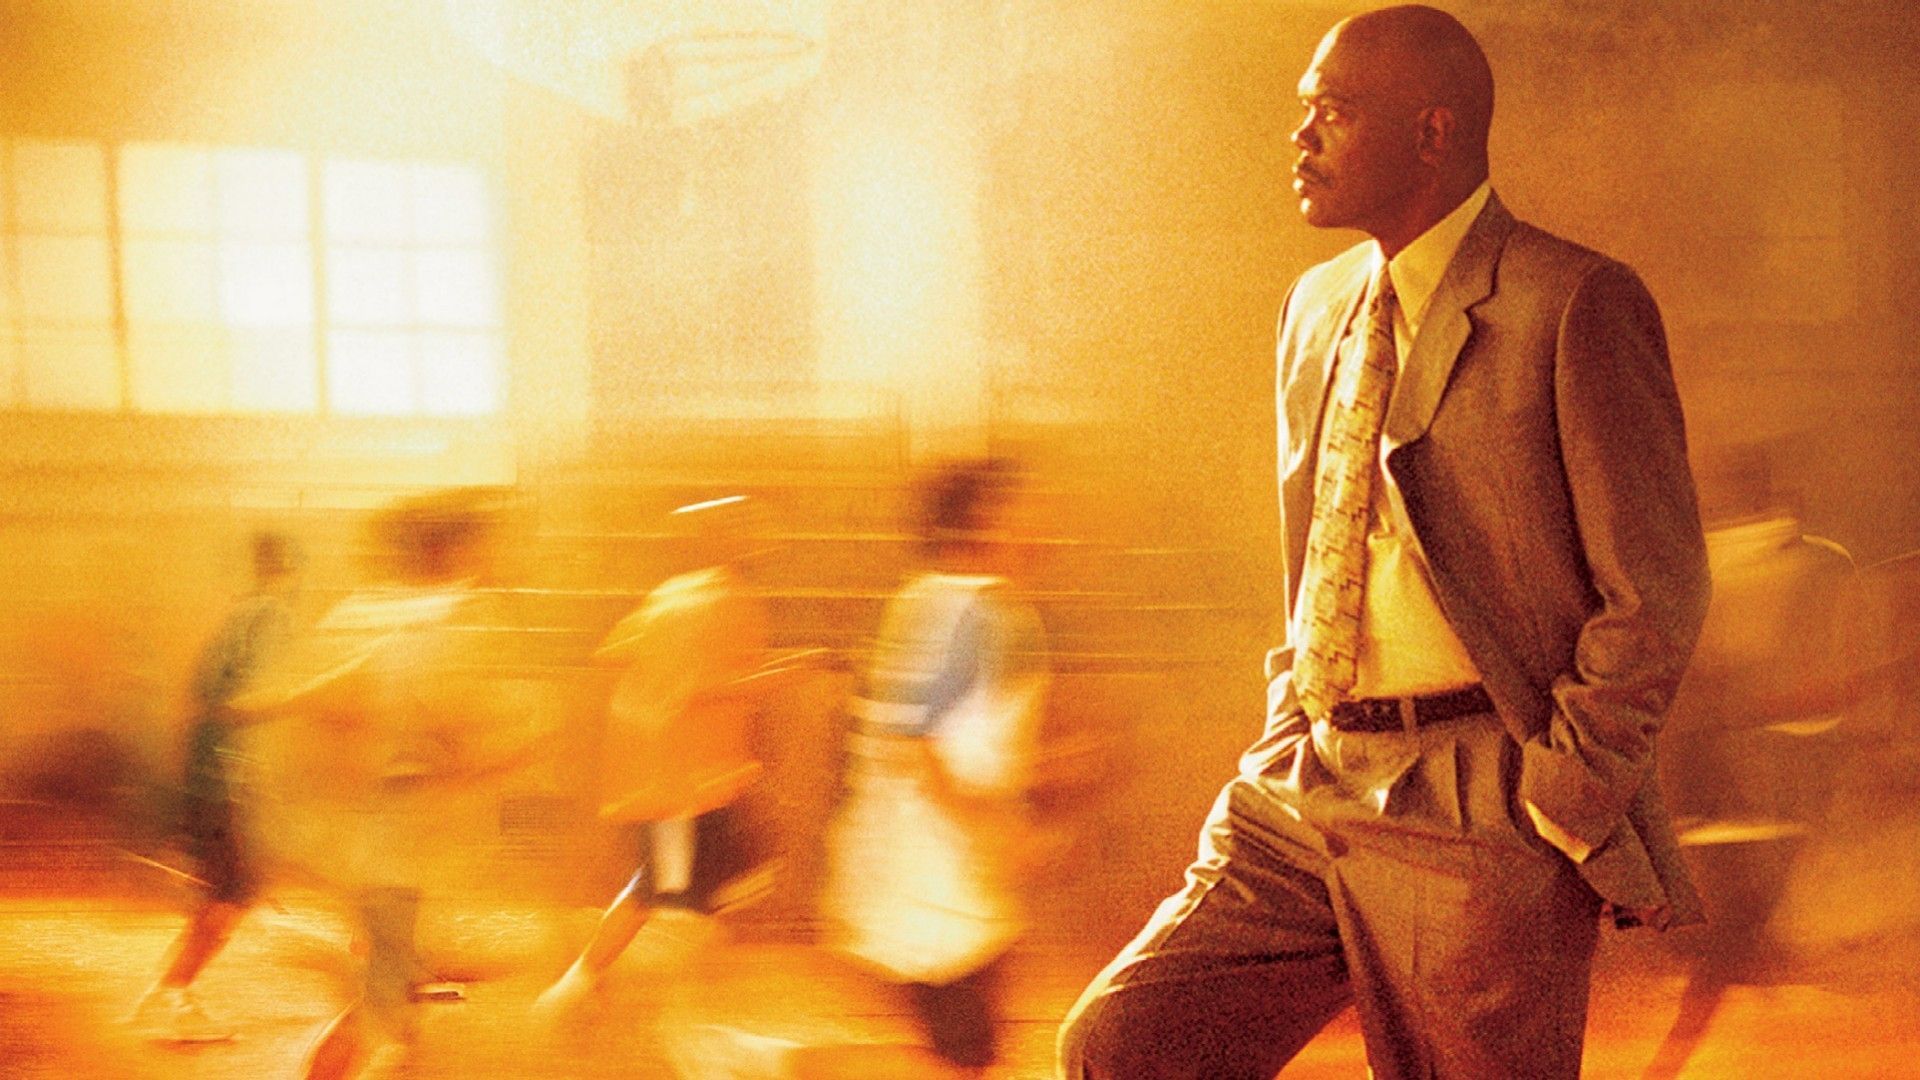 Coach Carter Wallpaper. Daily inspiration art photo, picture and wallpaper. Coach carter, Movie tv, Movies